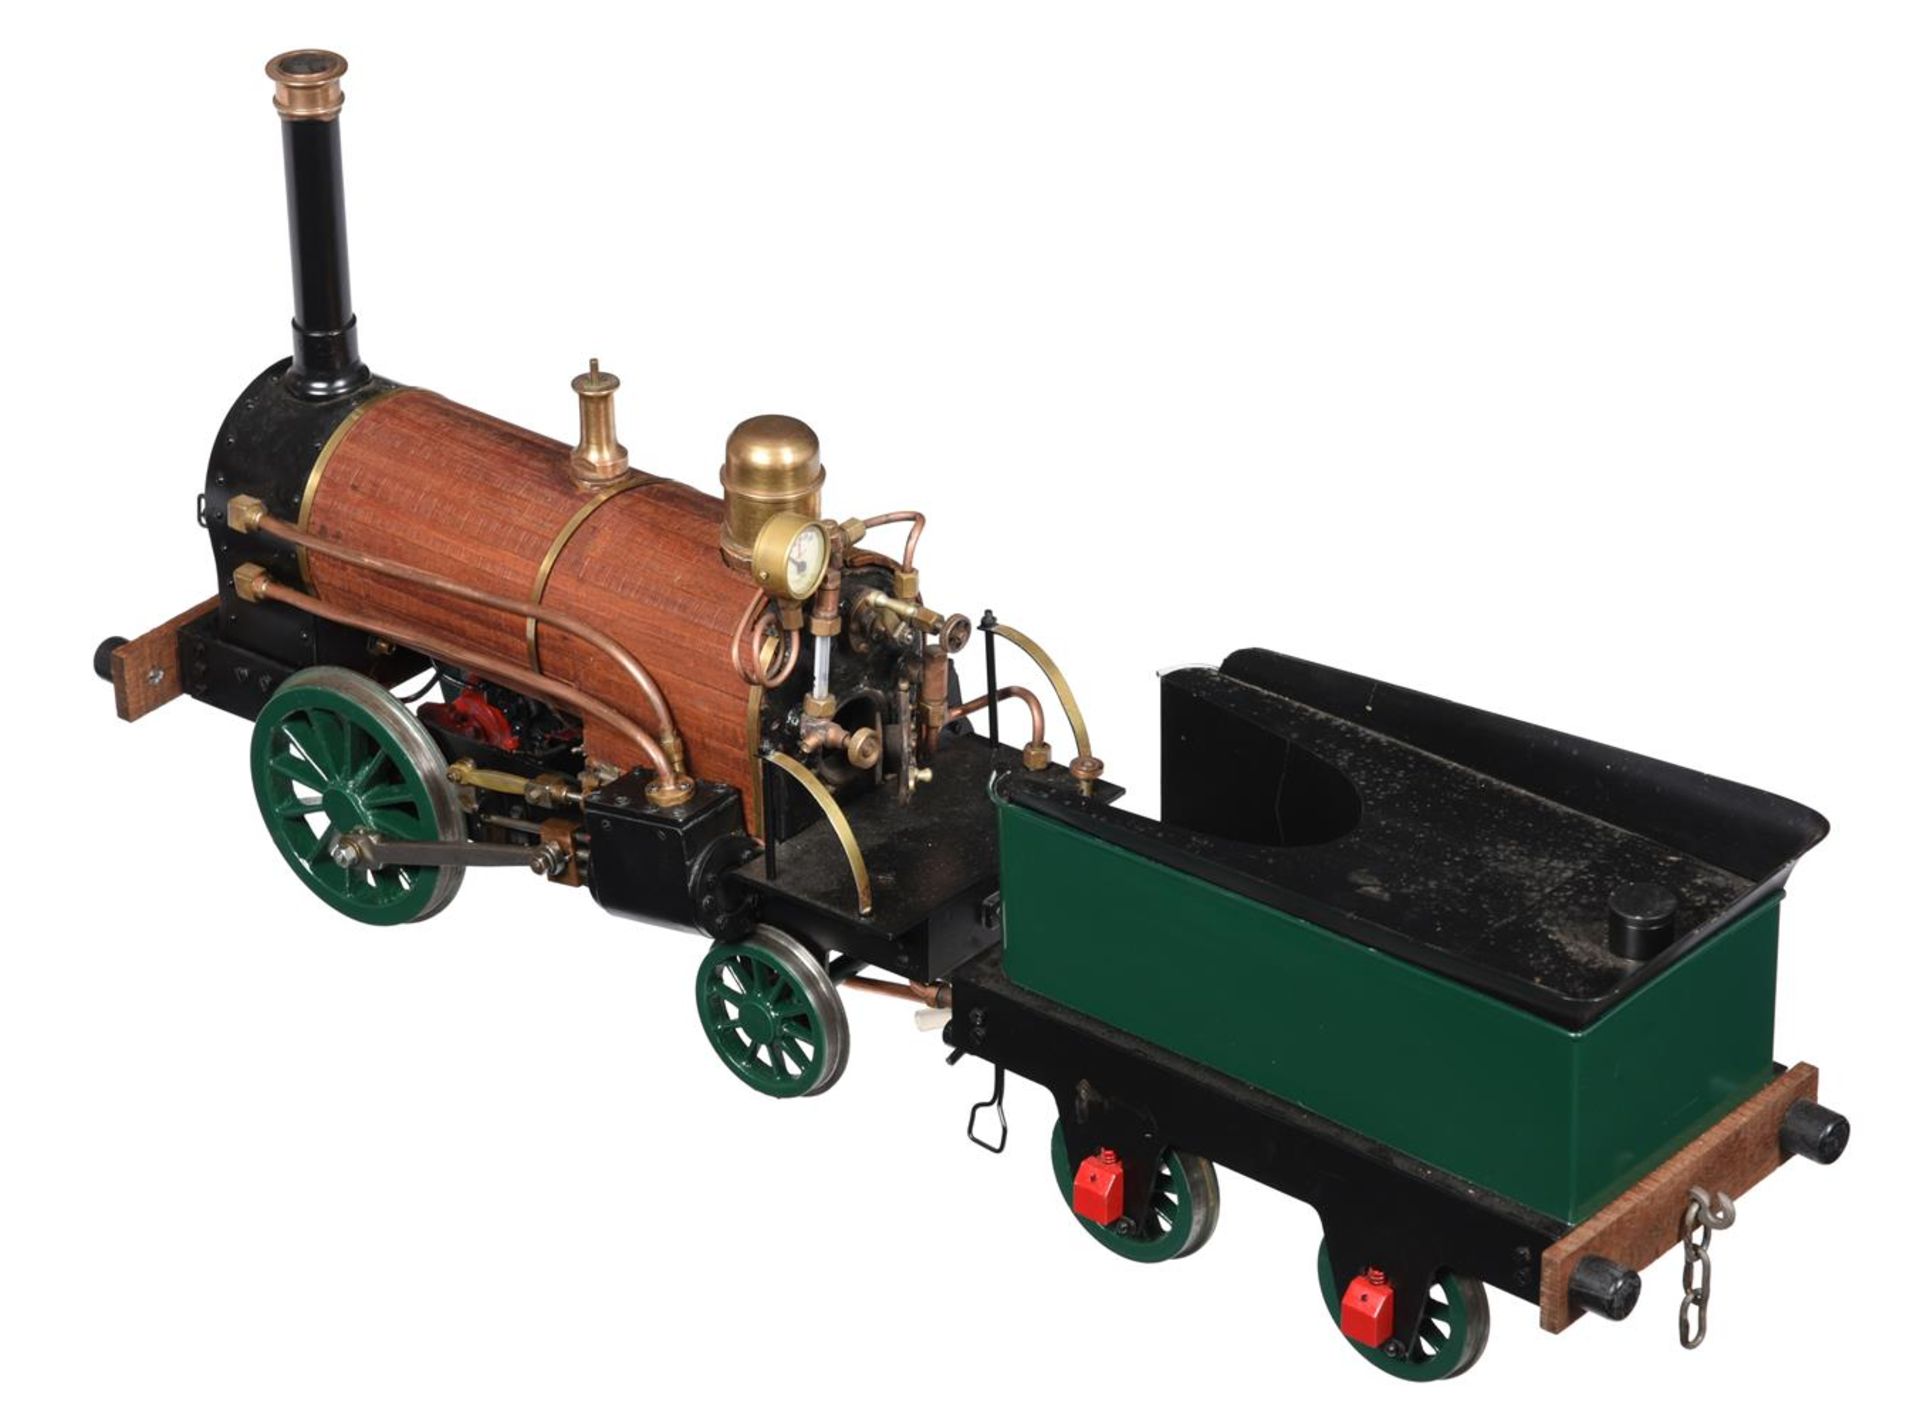 A well-engineered 3 1/2 inch gauge model of the historic 'Rainhill' locomotive and tender - Image 2 of 3